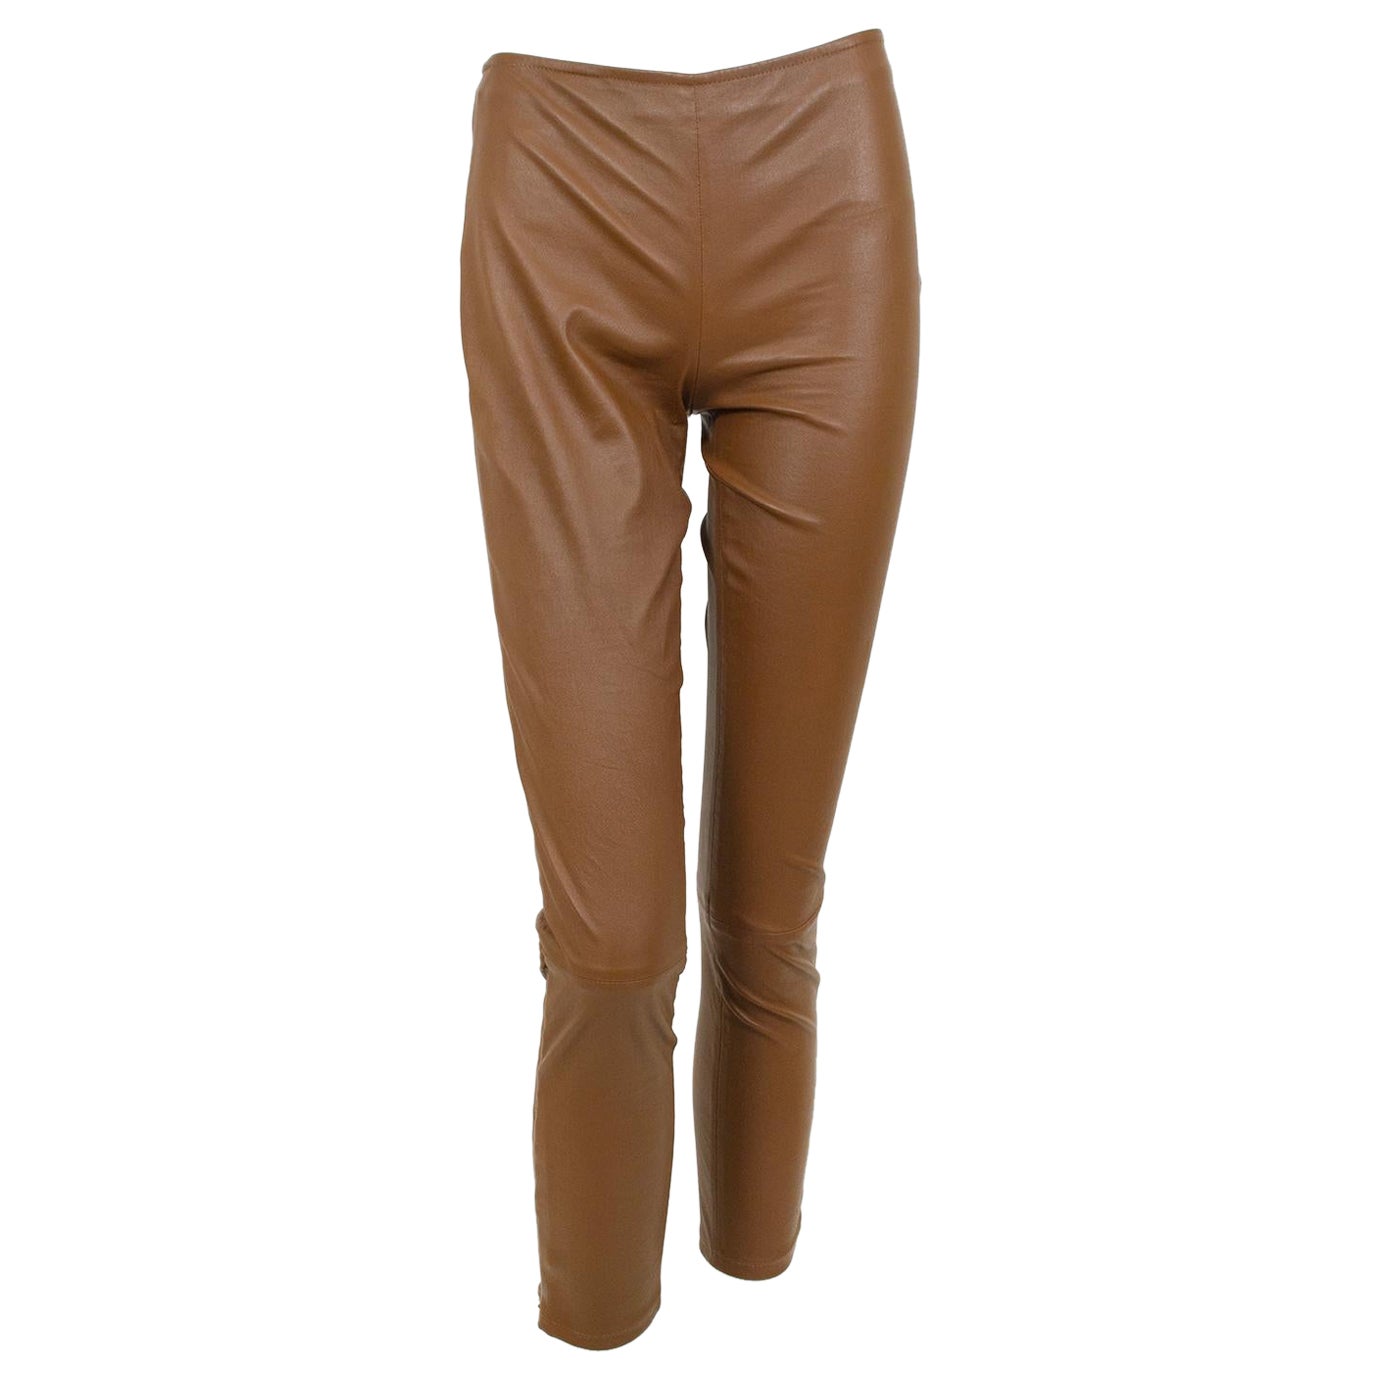 New The Row Ellerton Brown Leather Ankle Zip Stretch Moto Leggings – XS-S, 2011 For Sale